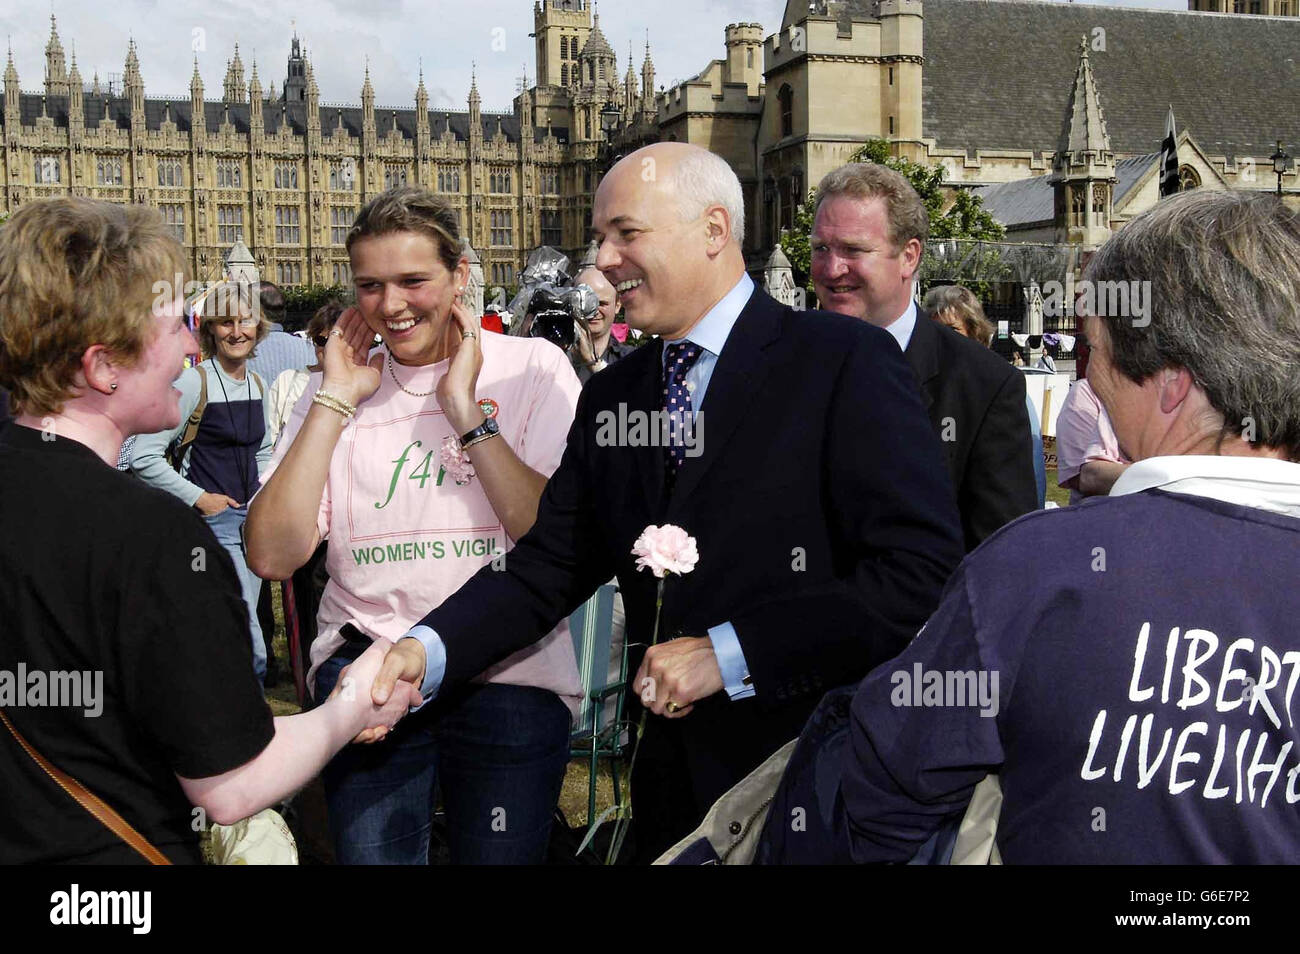 Pro Hunt protestation - Iain Duncan Smith Banque D'Images